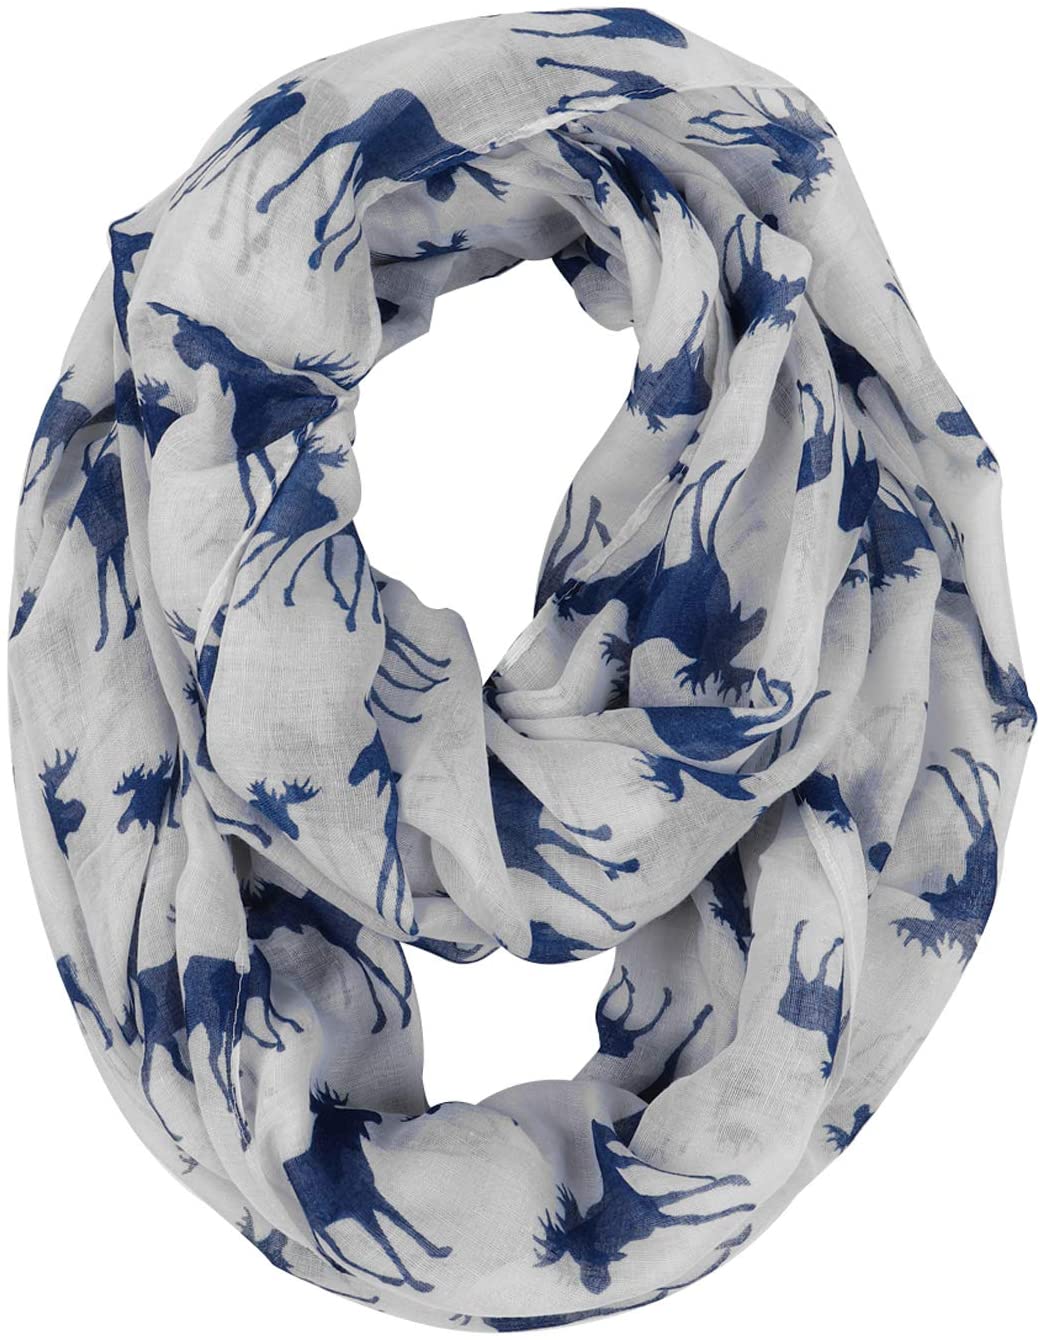 Lightweight Circle Infinity Scarves Moose Print Shawl Wrap Scarf For Women And Men